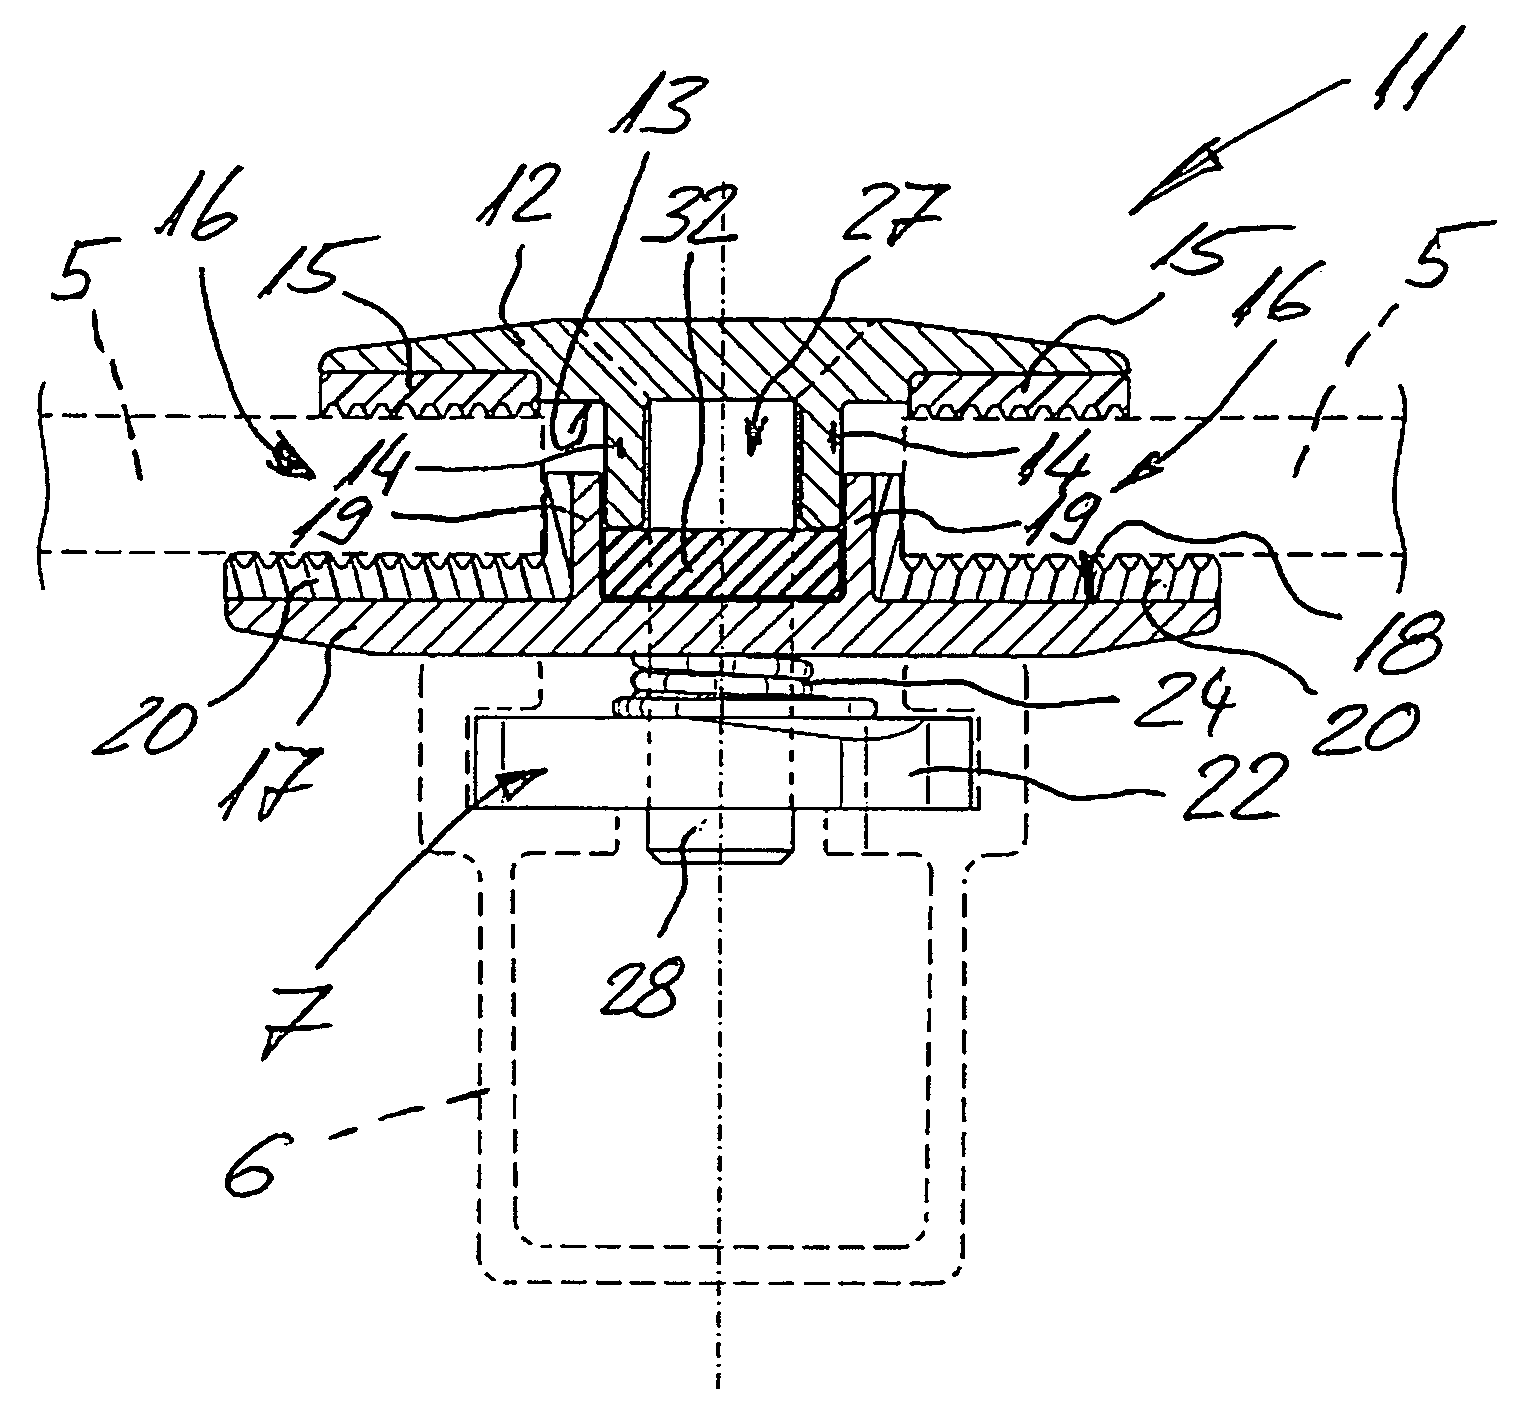 Mounting device for securing plate-shaped elements